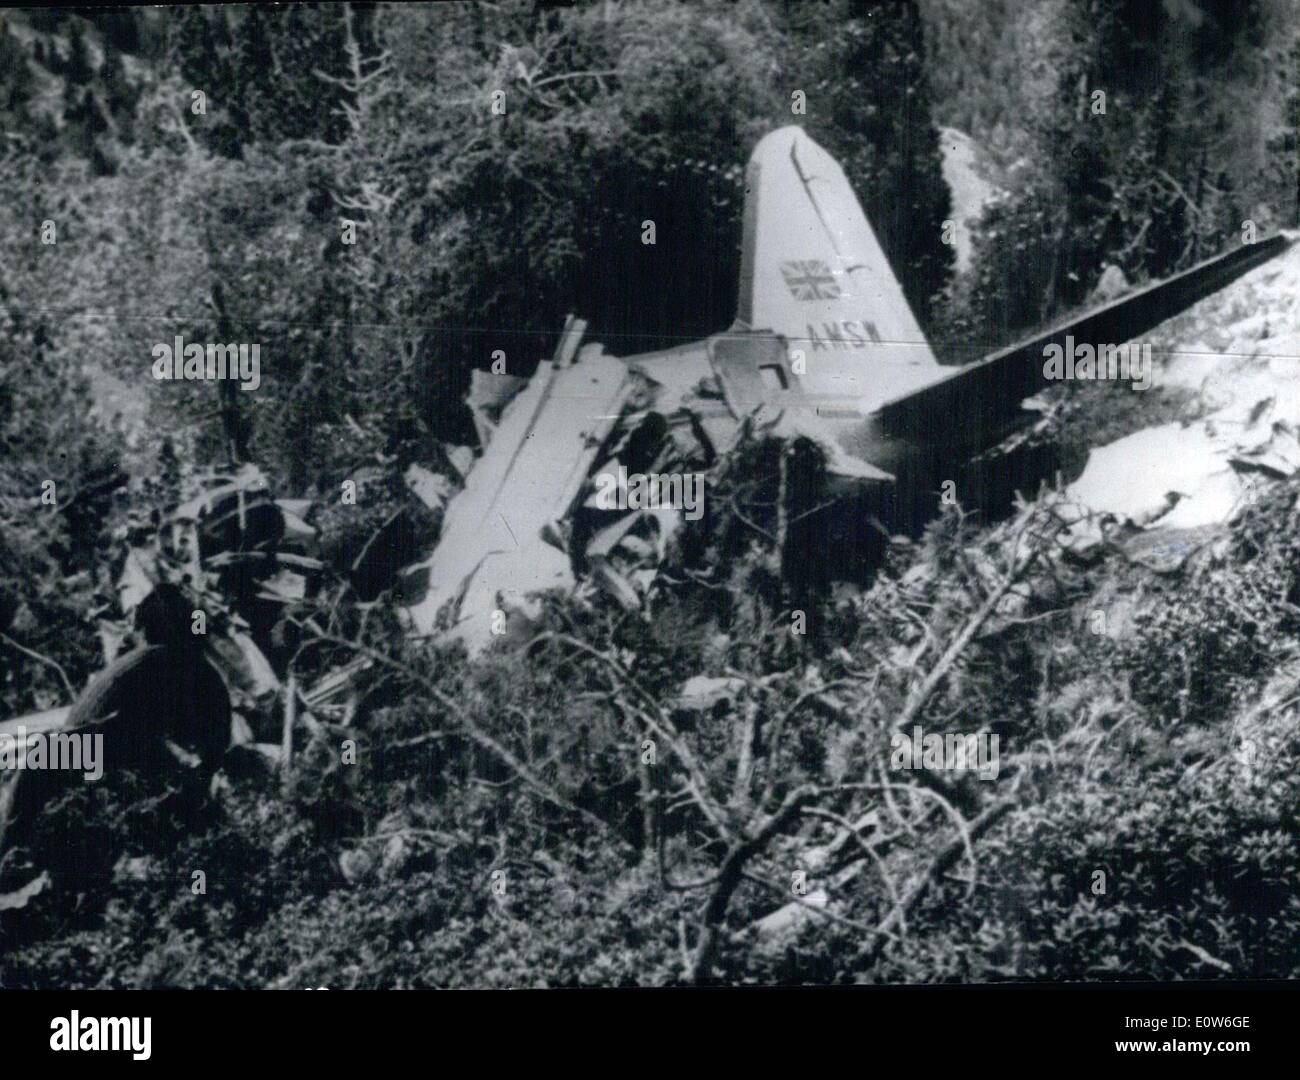 Oct. 10, 1961 - 34 die as holiday plane hits Pyrenees peak: 3T passengers and 3 members of the crew were killed when a Dakota on a charter flight from Gatwick crashed in tee Pryness yesterday. All the passengers were on their way to holidays on the Costa brava. Photo Shows The wreckage of the plane. Only tail remained practically intact. Stock Photo